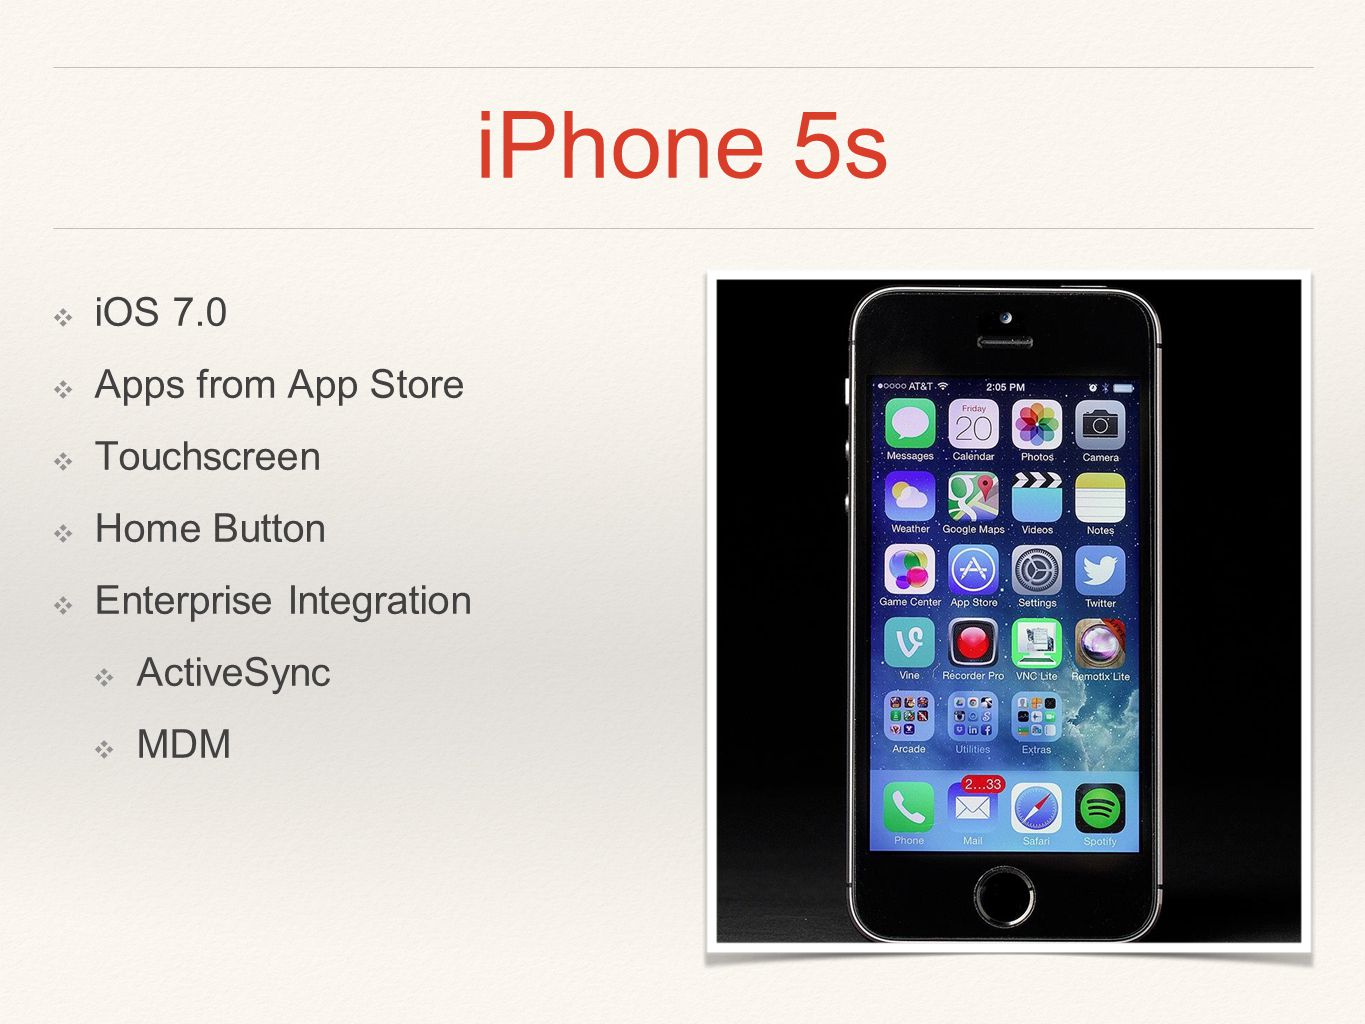 iPhone 5s ❖ iOS 7.0 ❖ Apps from App Store ❖ Touchscreen ❖ Home Button ❖ Enterprise Integration ❖ ActiveSync ❖ MDM